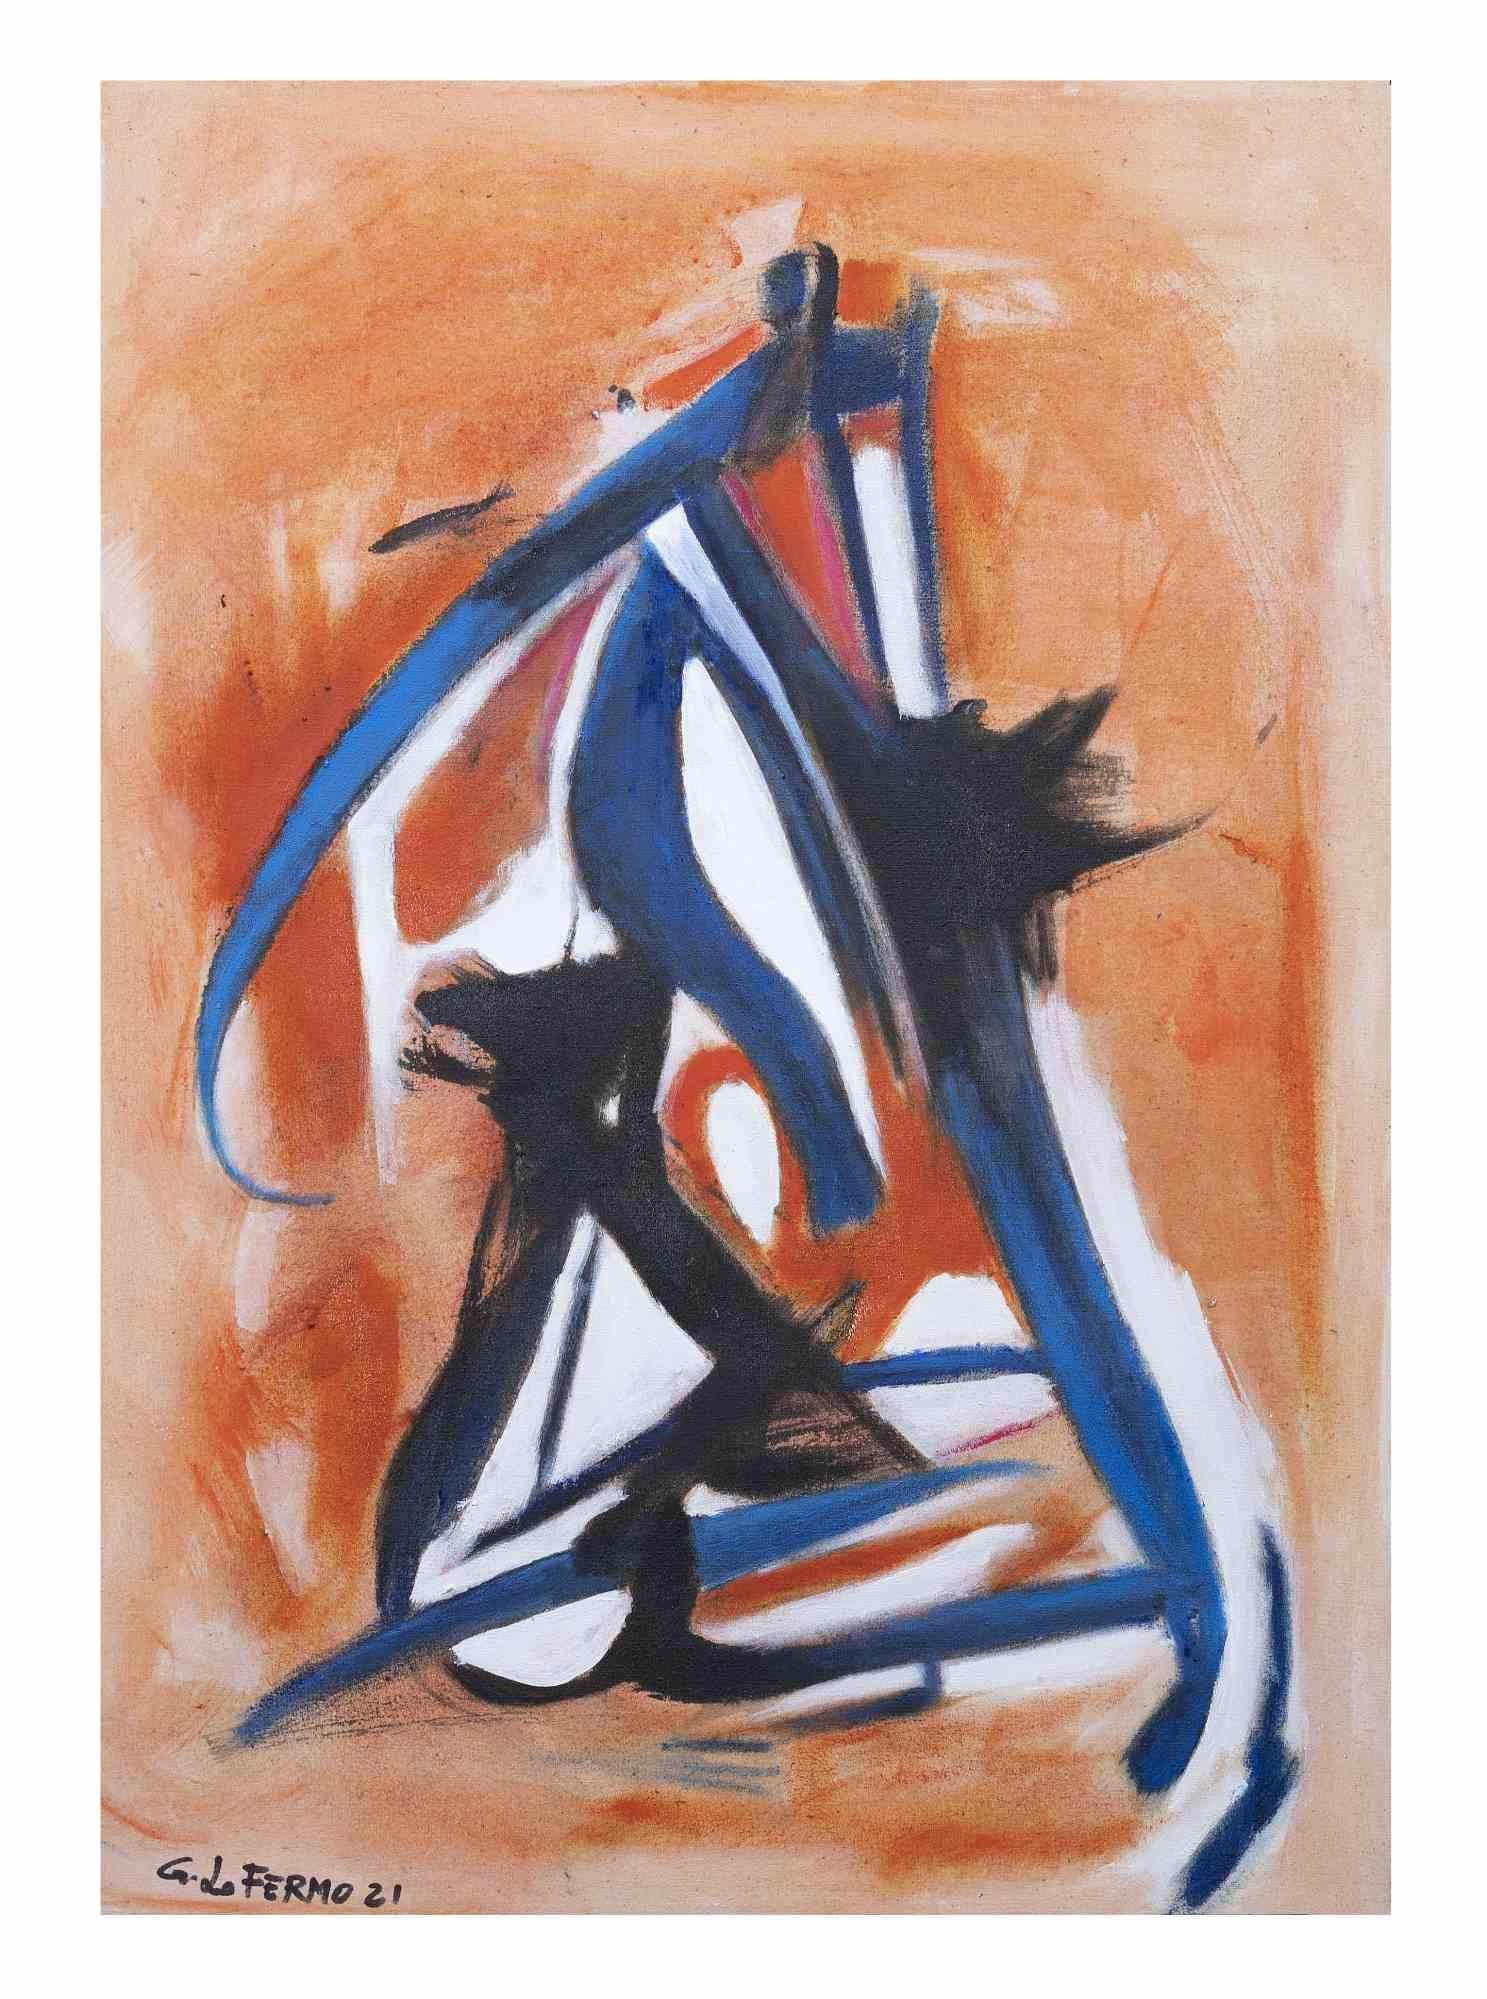 Abstract Composition is an original artwork realized by Giorgio Lo Fermo (b. 1947) in 2021.

Original Oil Painting on Canvas.

Hand-signed, titled and dated on the back of the canvas.

Hand-signed and dated on the lower left corner: Lo Fermo 21.